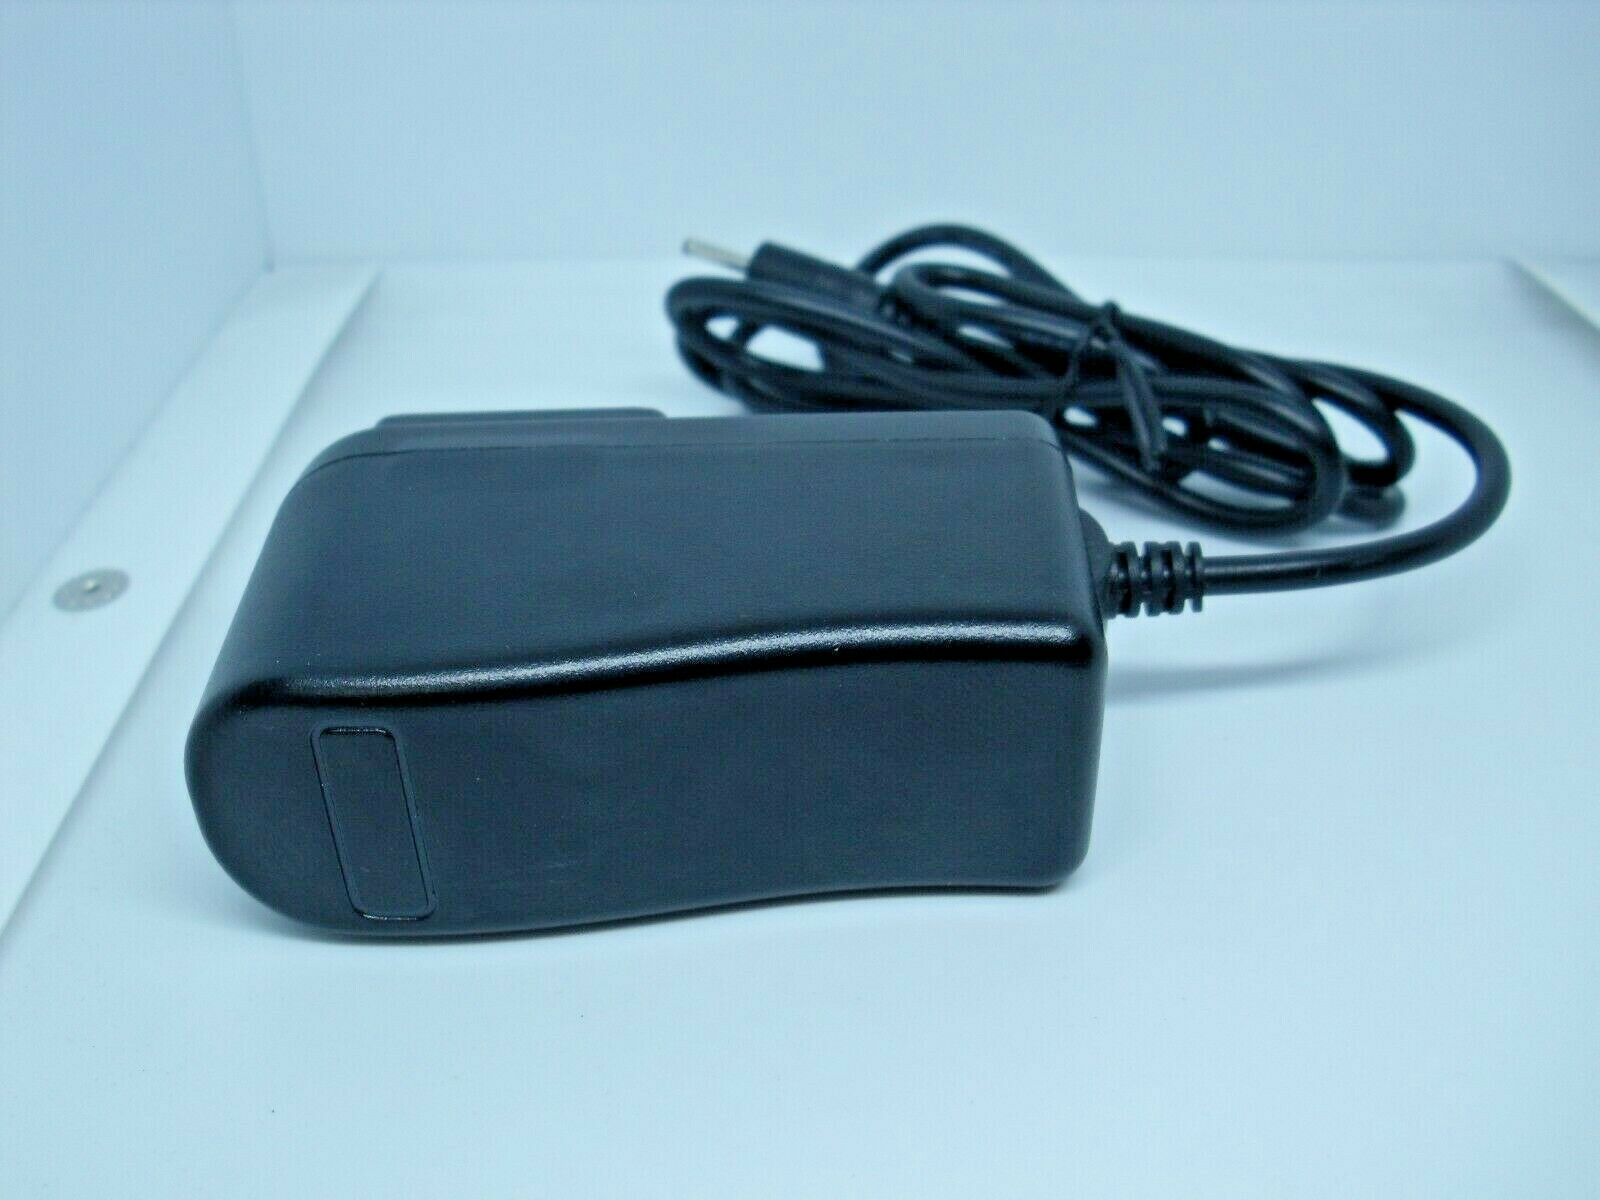 AC DC Power Supply Adapter THX-050200KE Output 5v 2A Thin Plug USA SELLER Type: Adapter Features: new Cable Length: - Click Image to Close